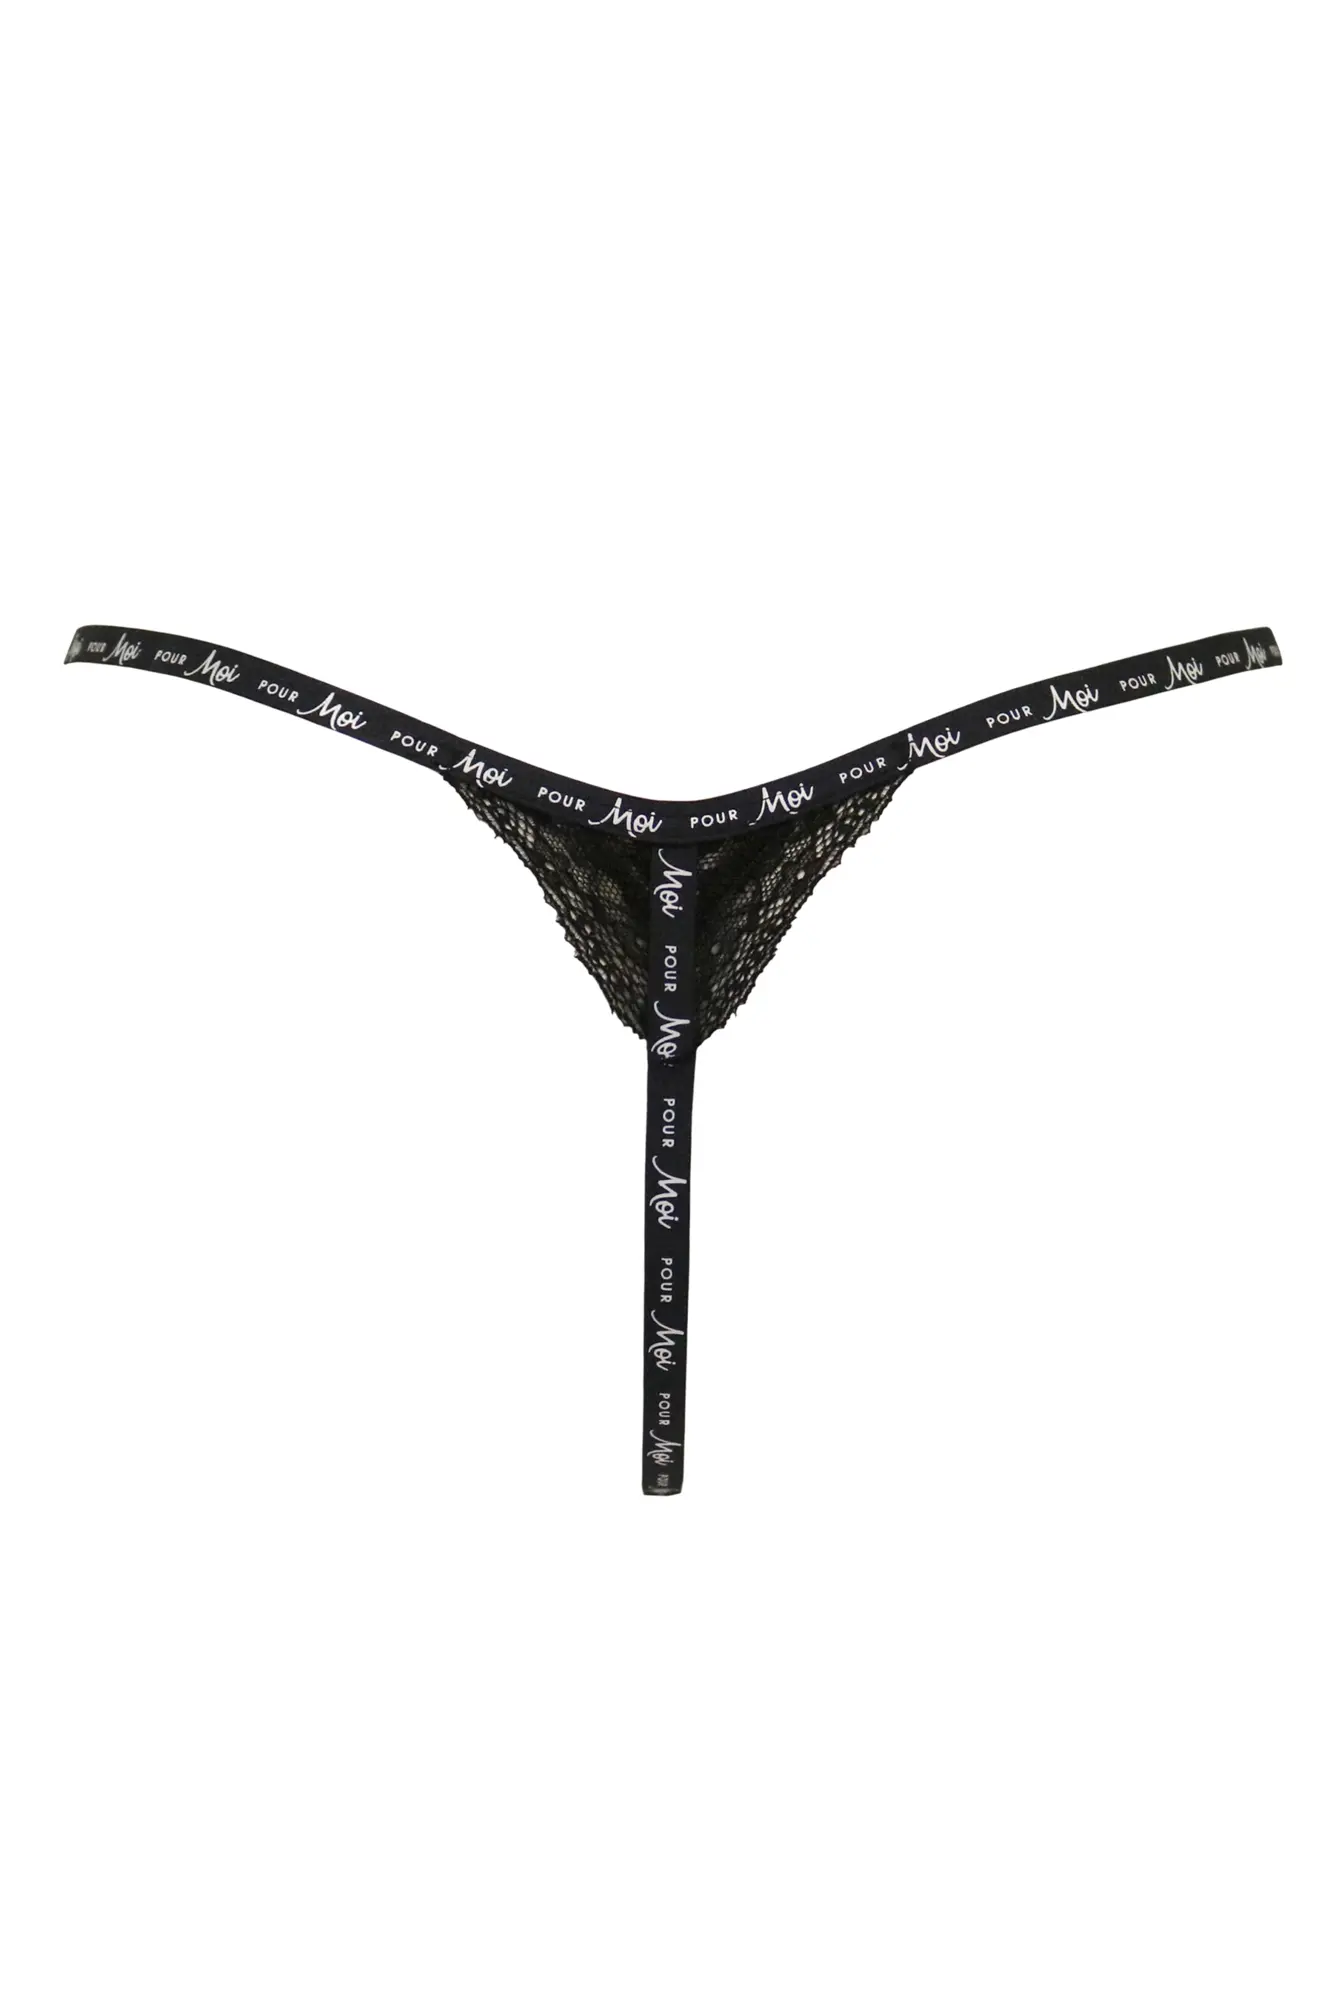 Pour Moi Scandalous wetlook high waist thong with lace up back detail in  black